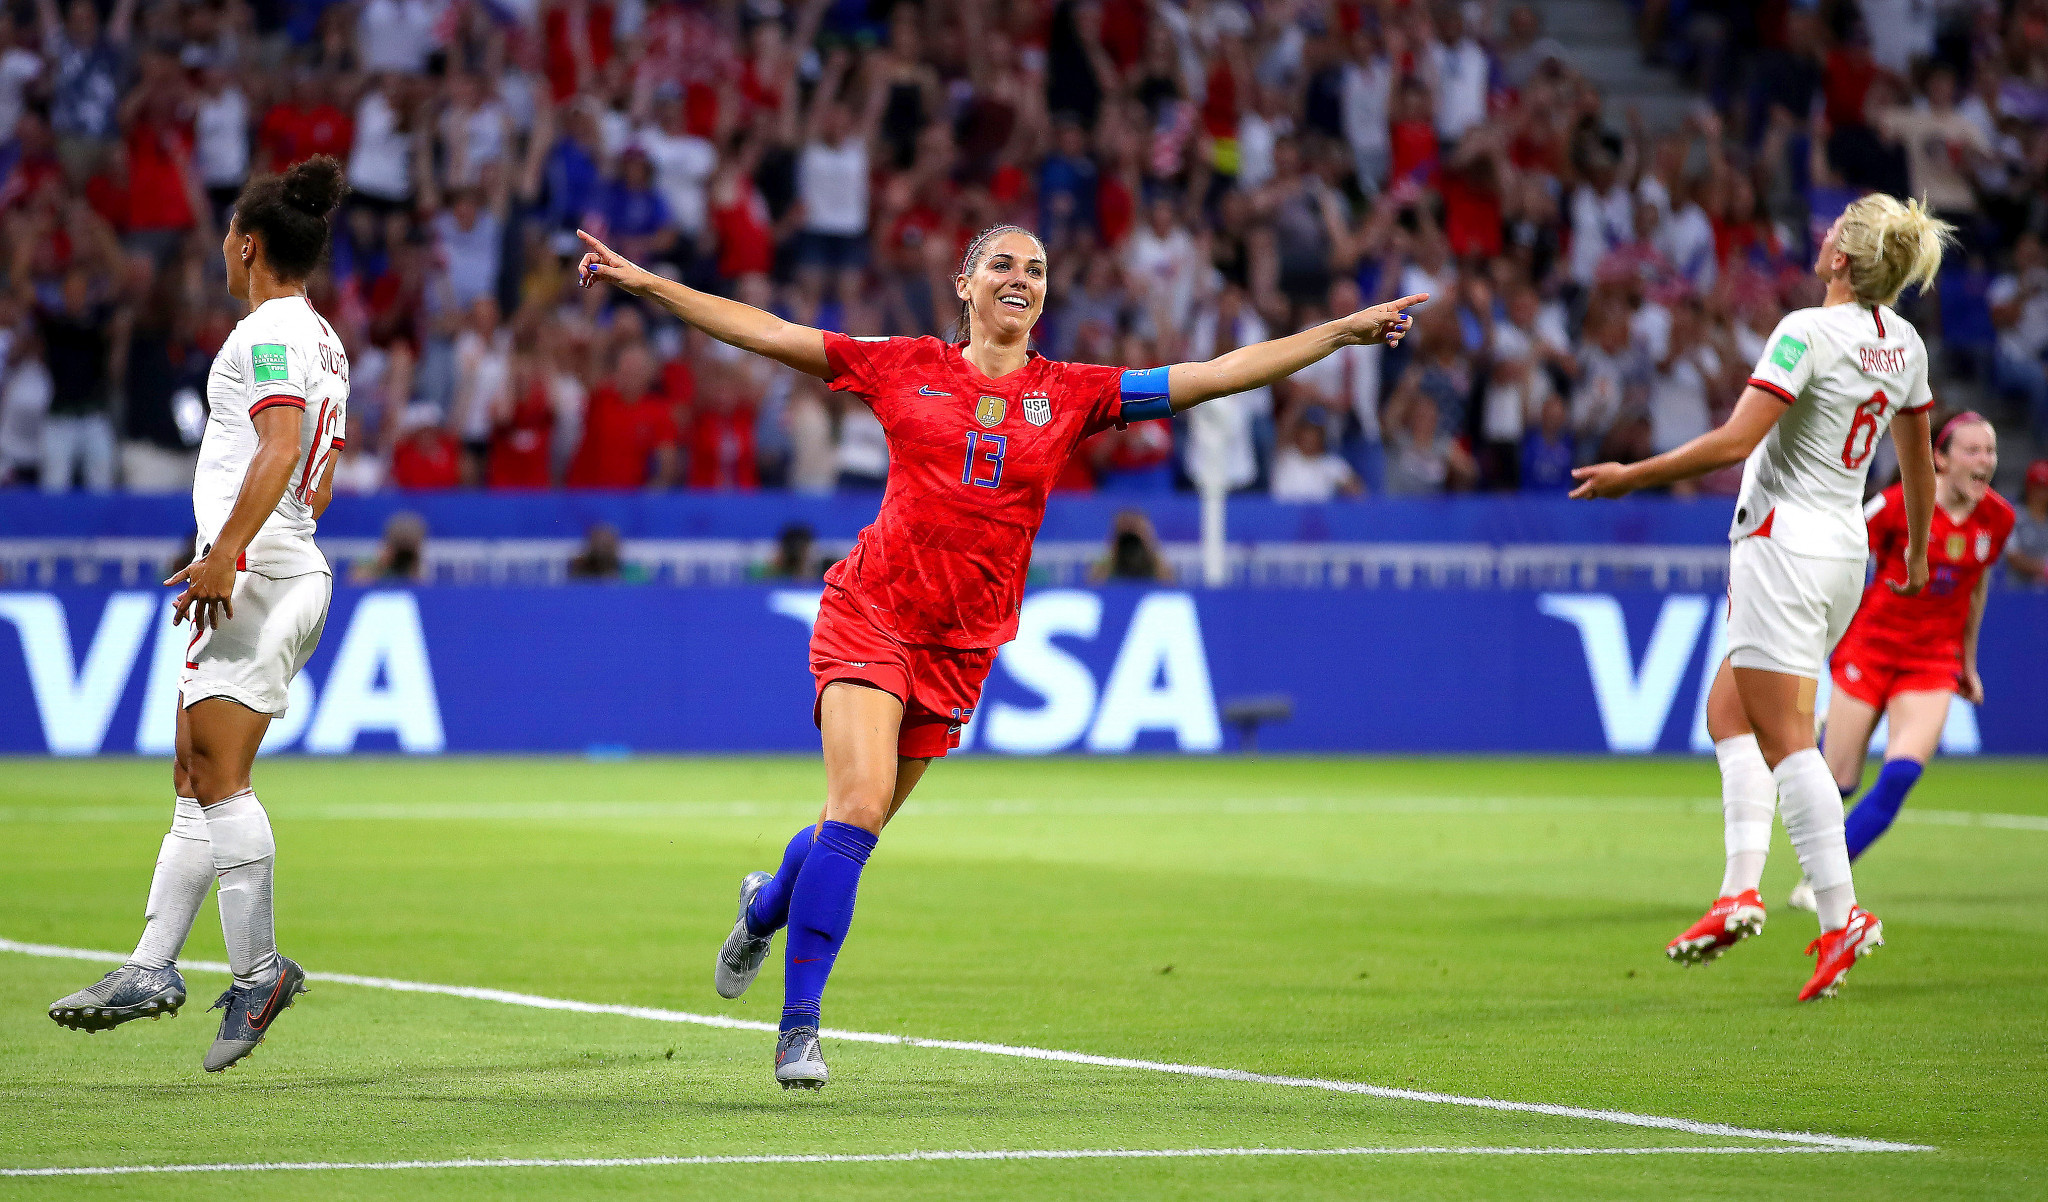 United States reach FIFA Women's World Cup final with dramatic win over England